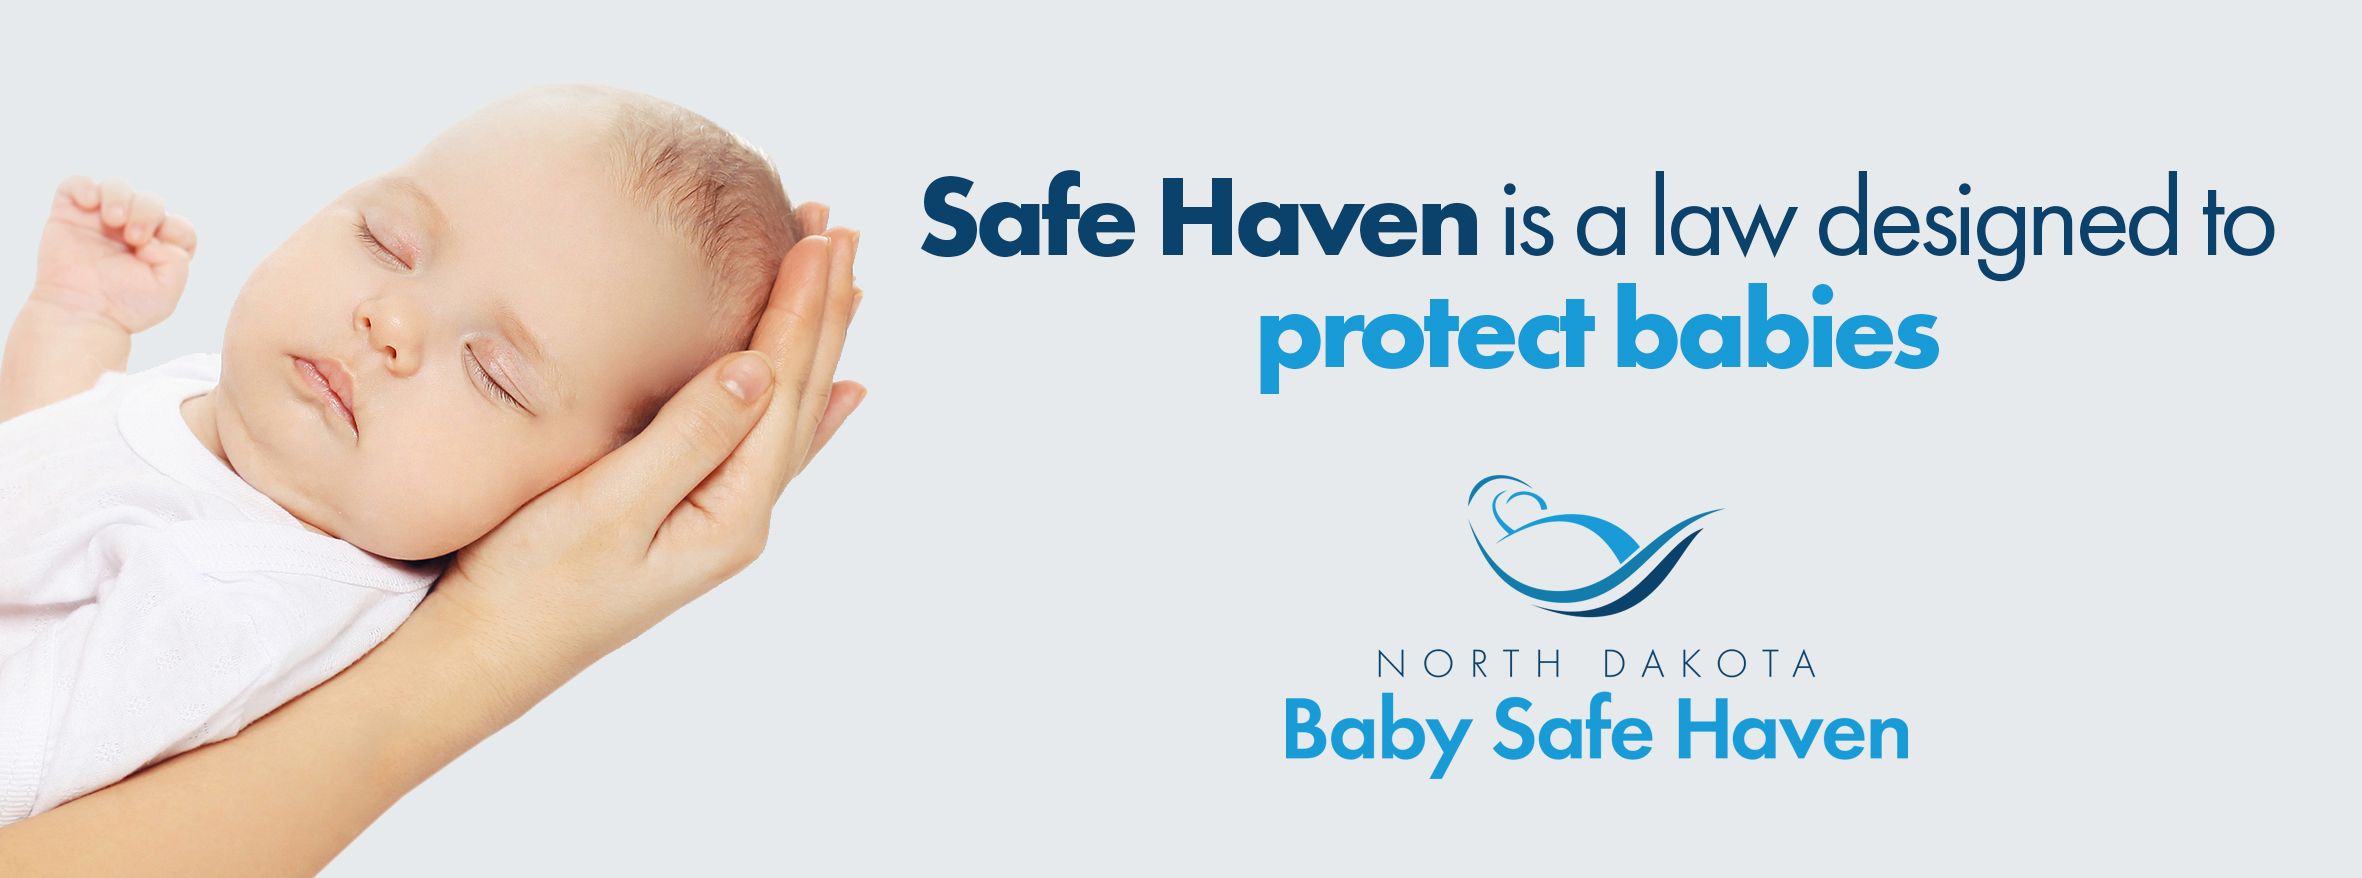 Baby Safe Haven - baby image